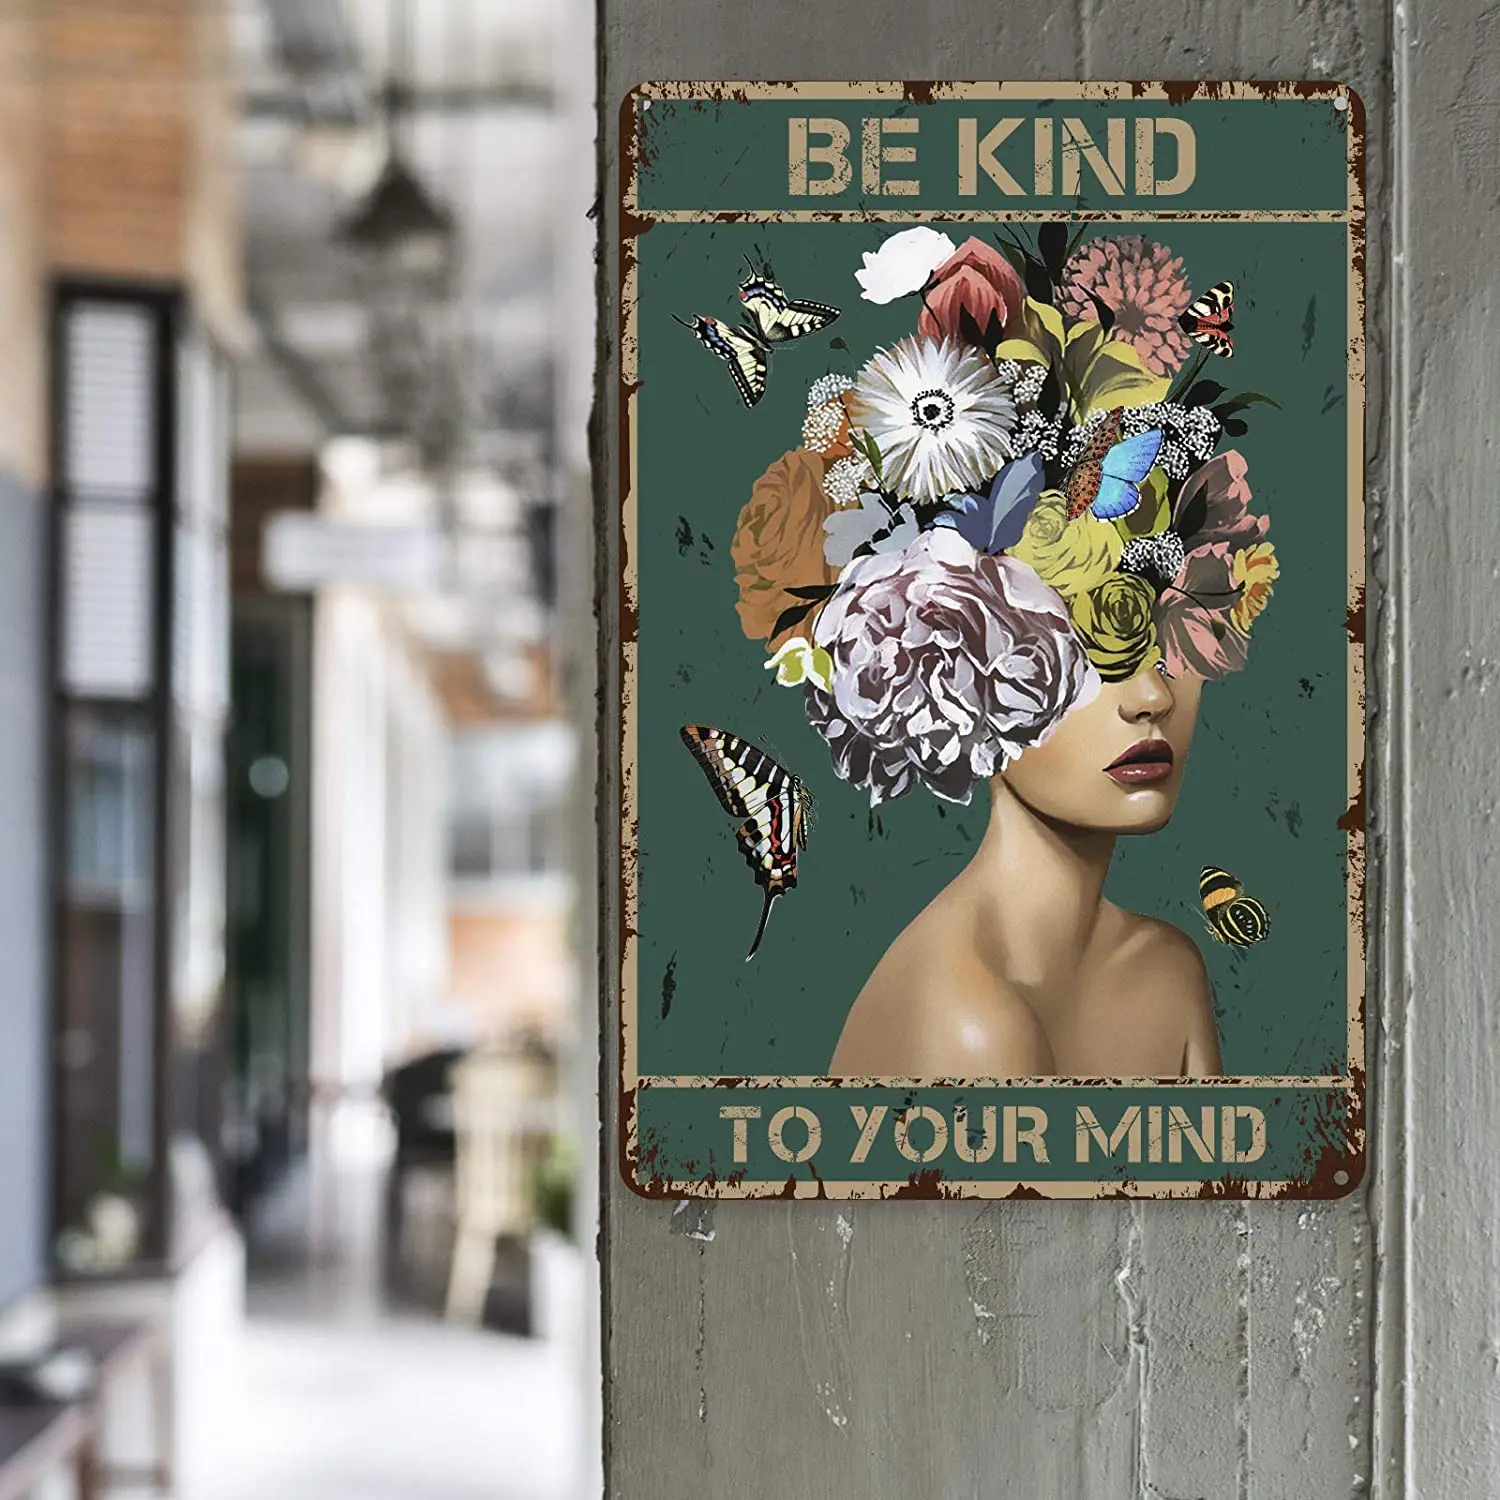 

ForbiddenPaper Inspirational Quote Metal Tin Sign Wall Decor - Be Kind to Your Mind Flower Vintage Tin Sign for Office/Home